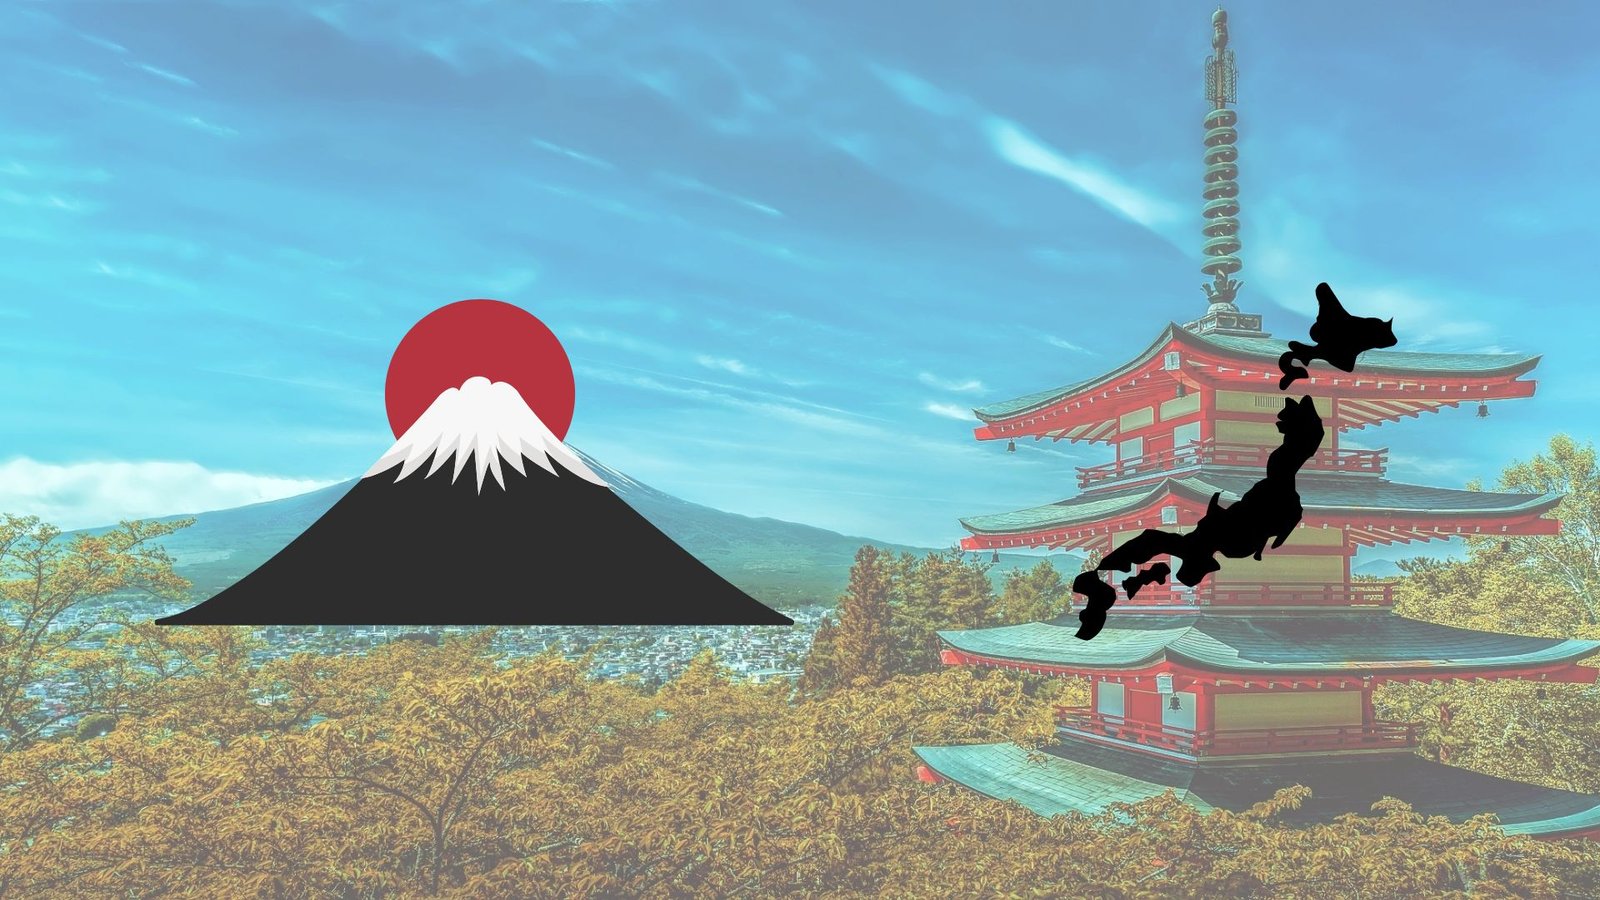 Mountain, map of Japan and background of Japanese landscape. Image for article about japanese visa for digital nomads